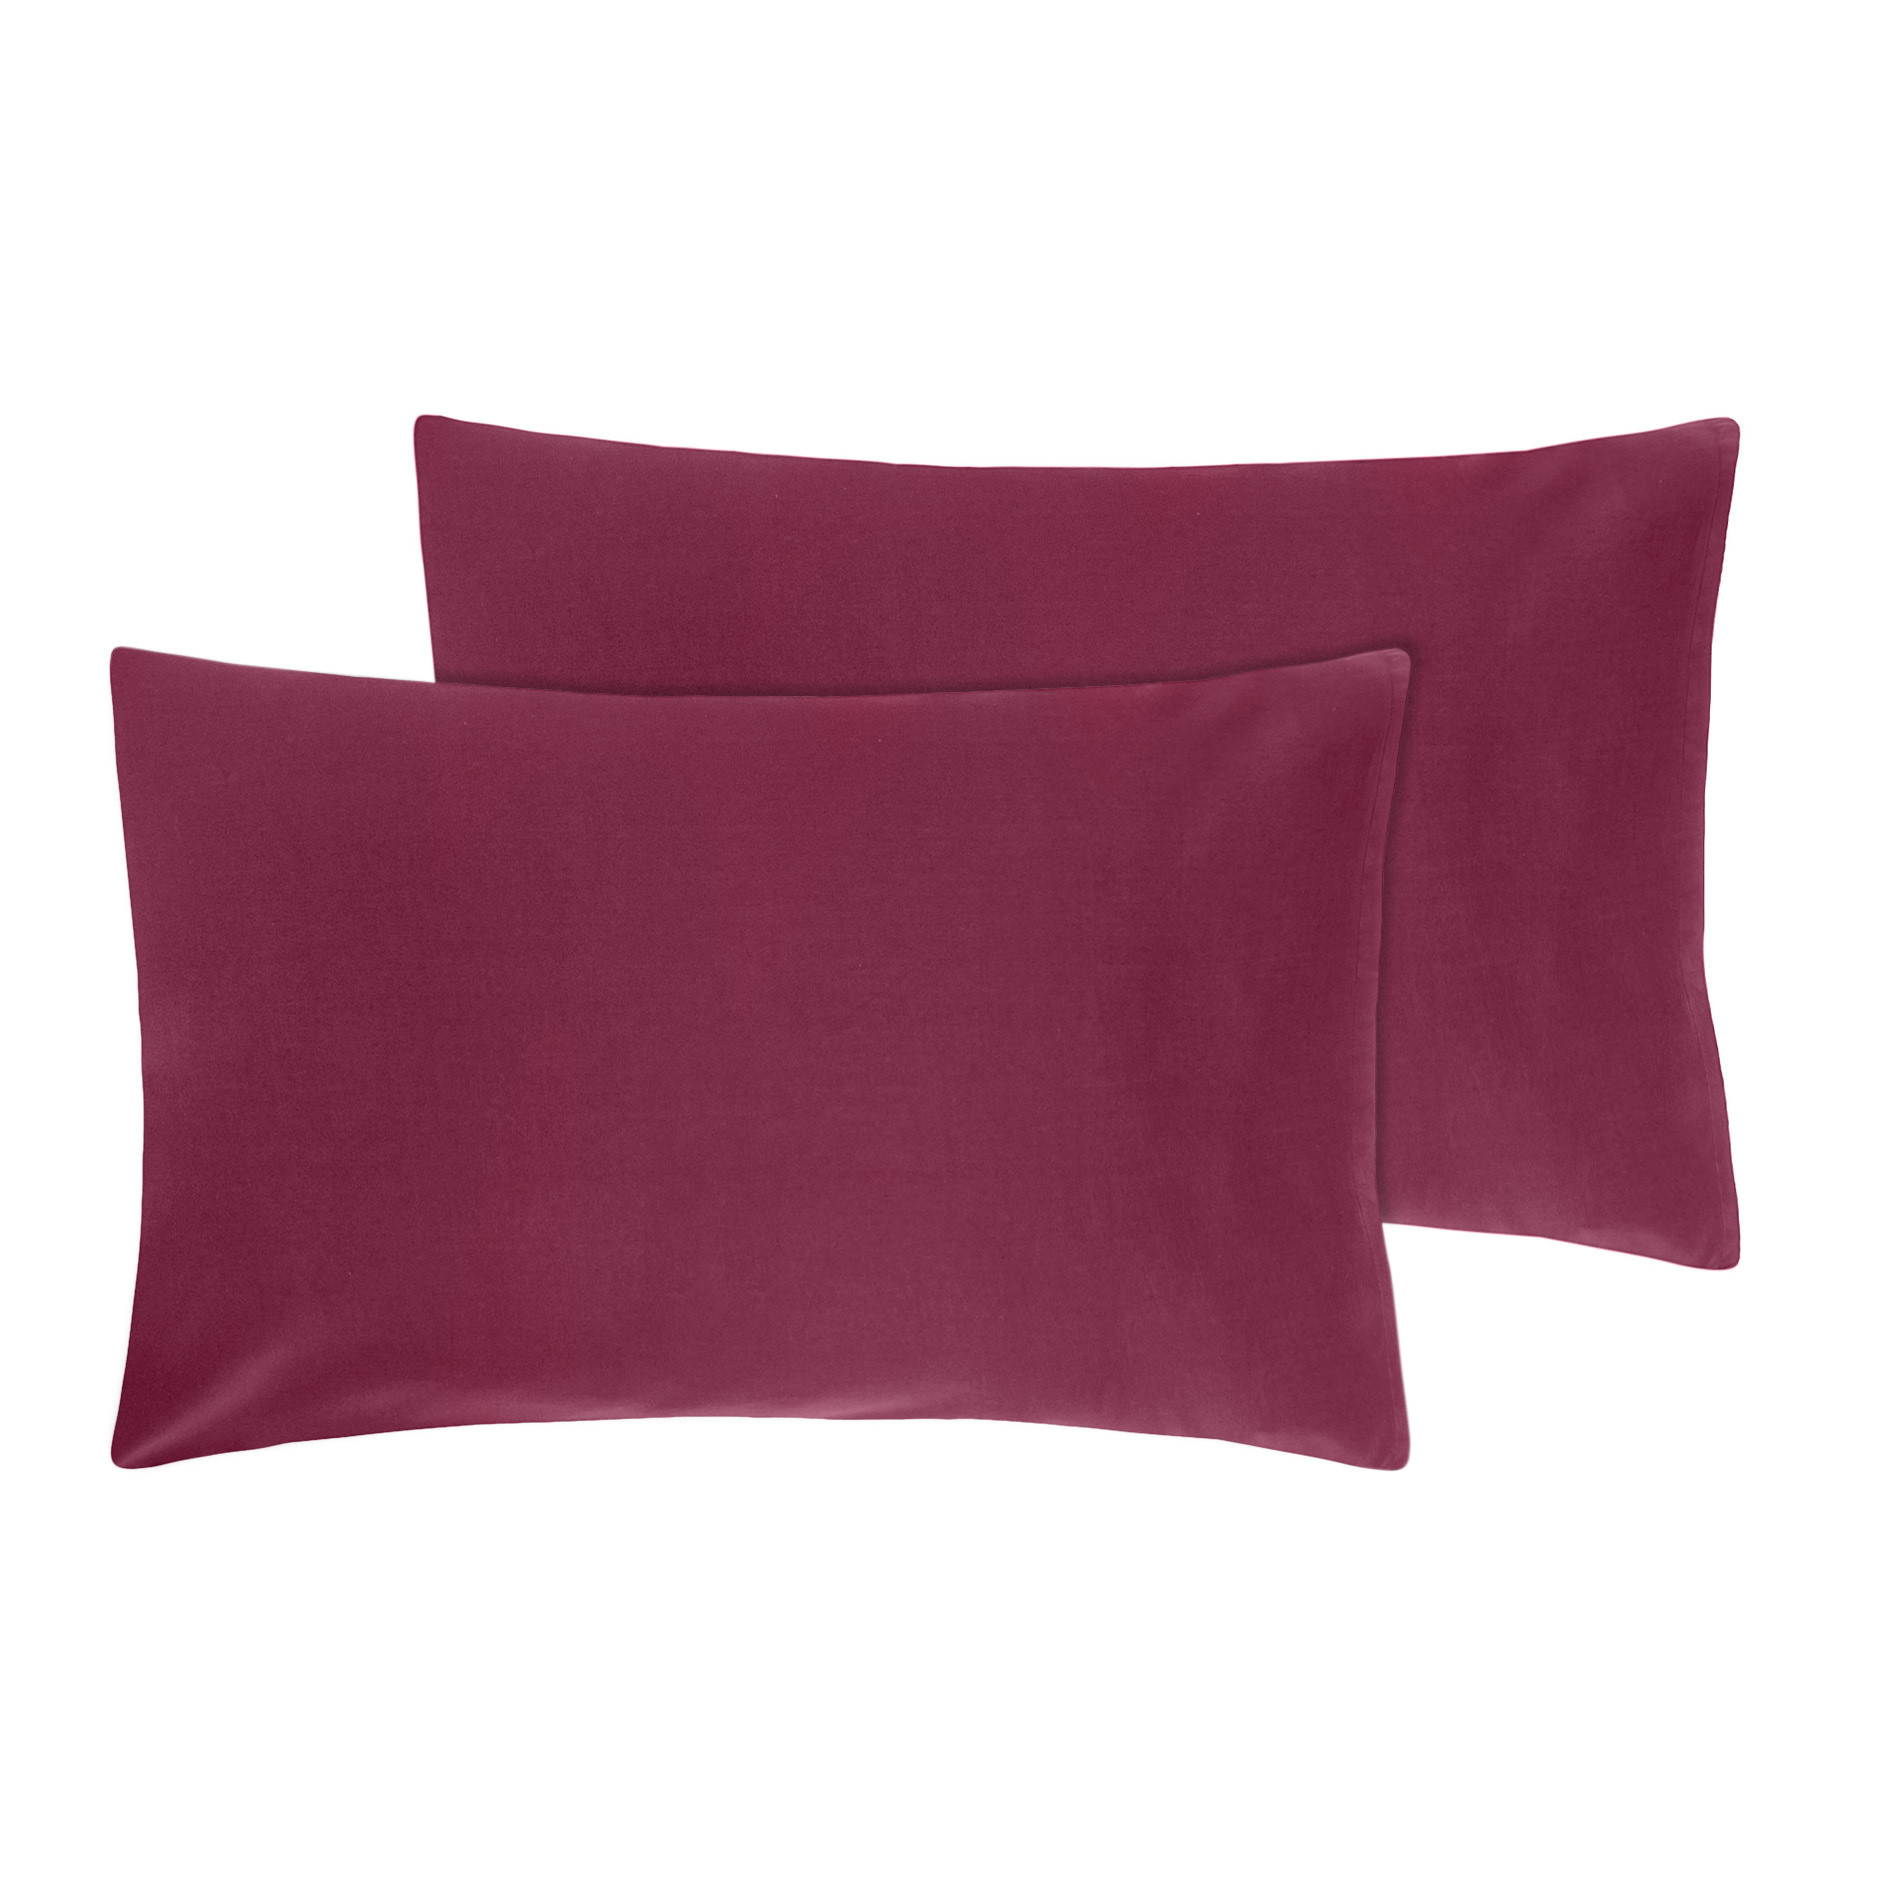 Zefiro 2-pack pillowcases in 100% cotton satin, Purple Violet, large image number 0